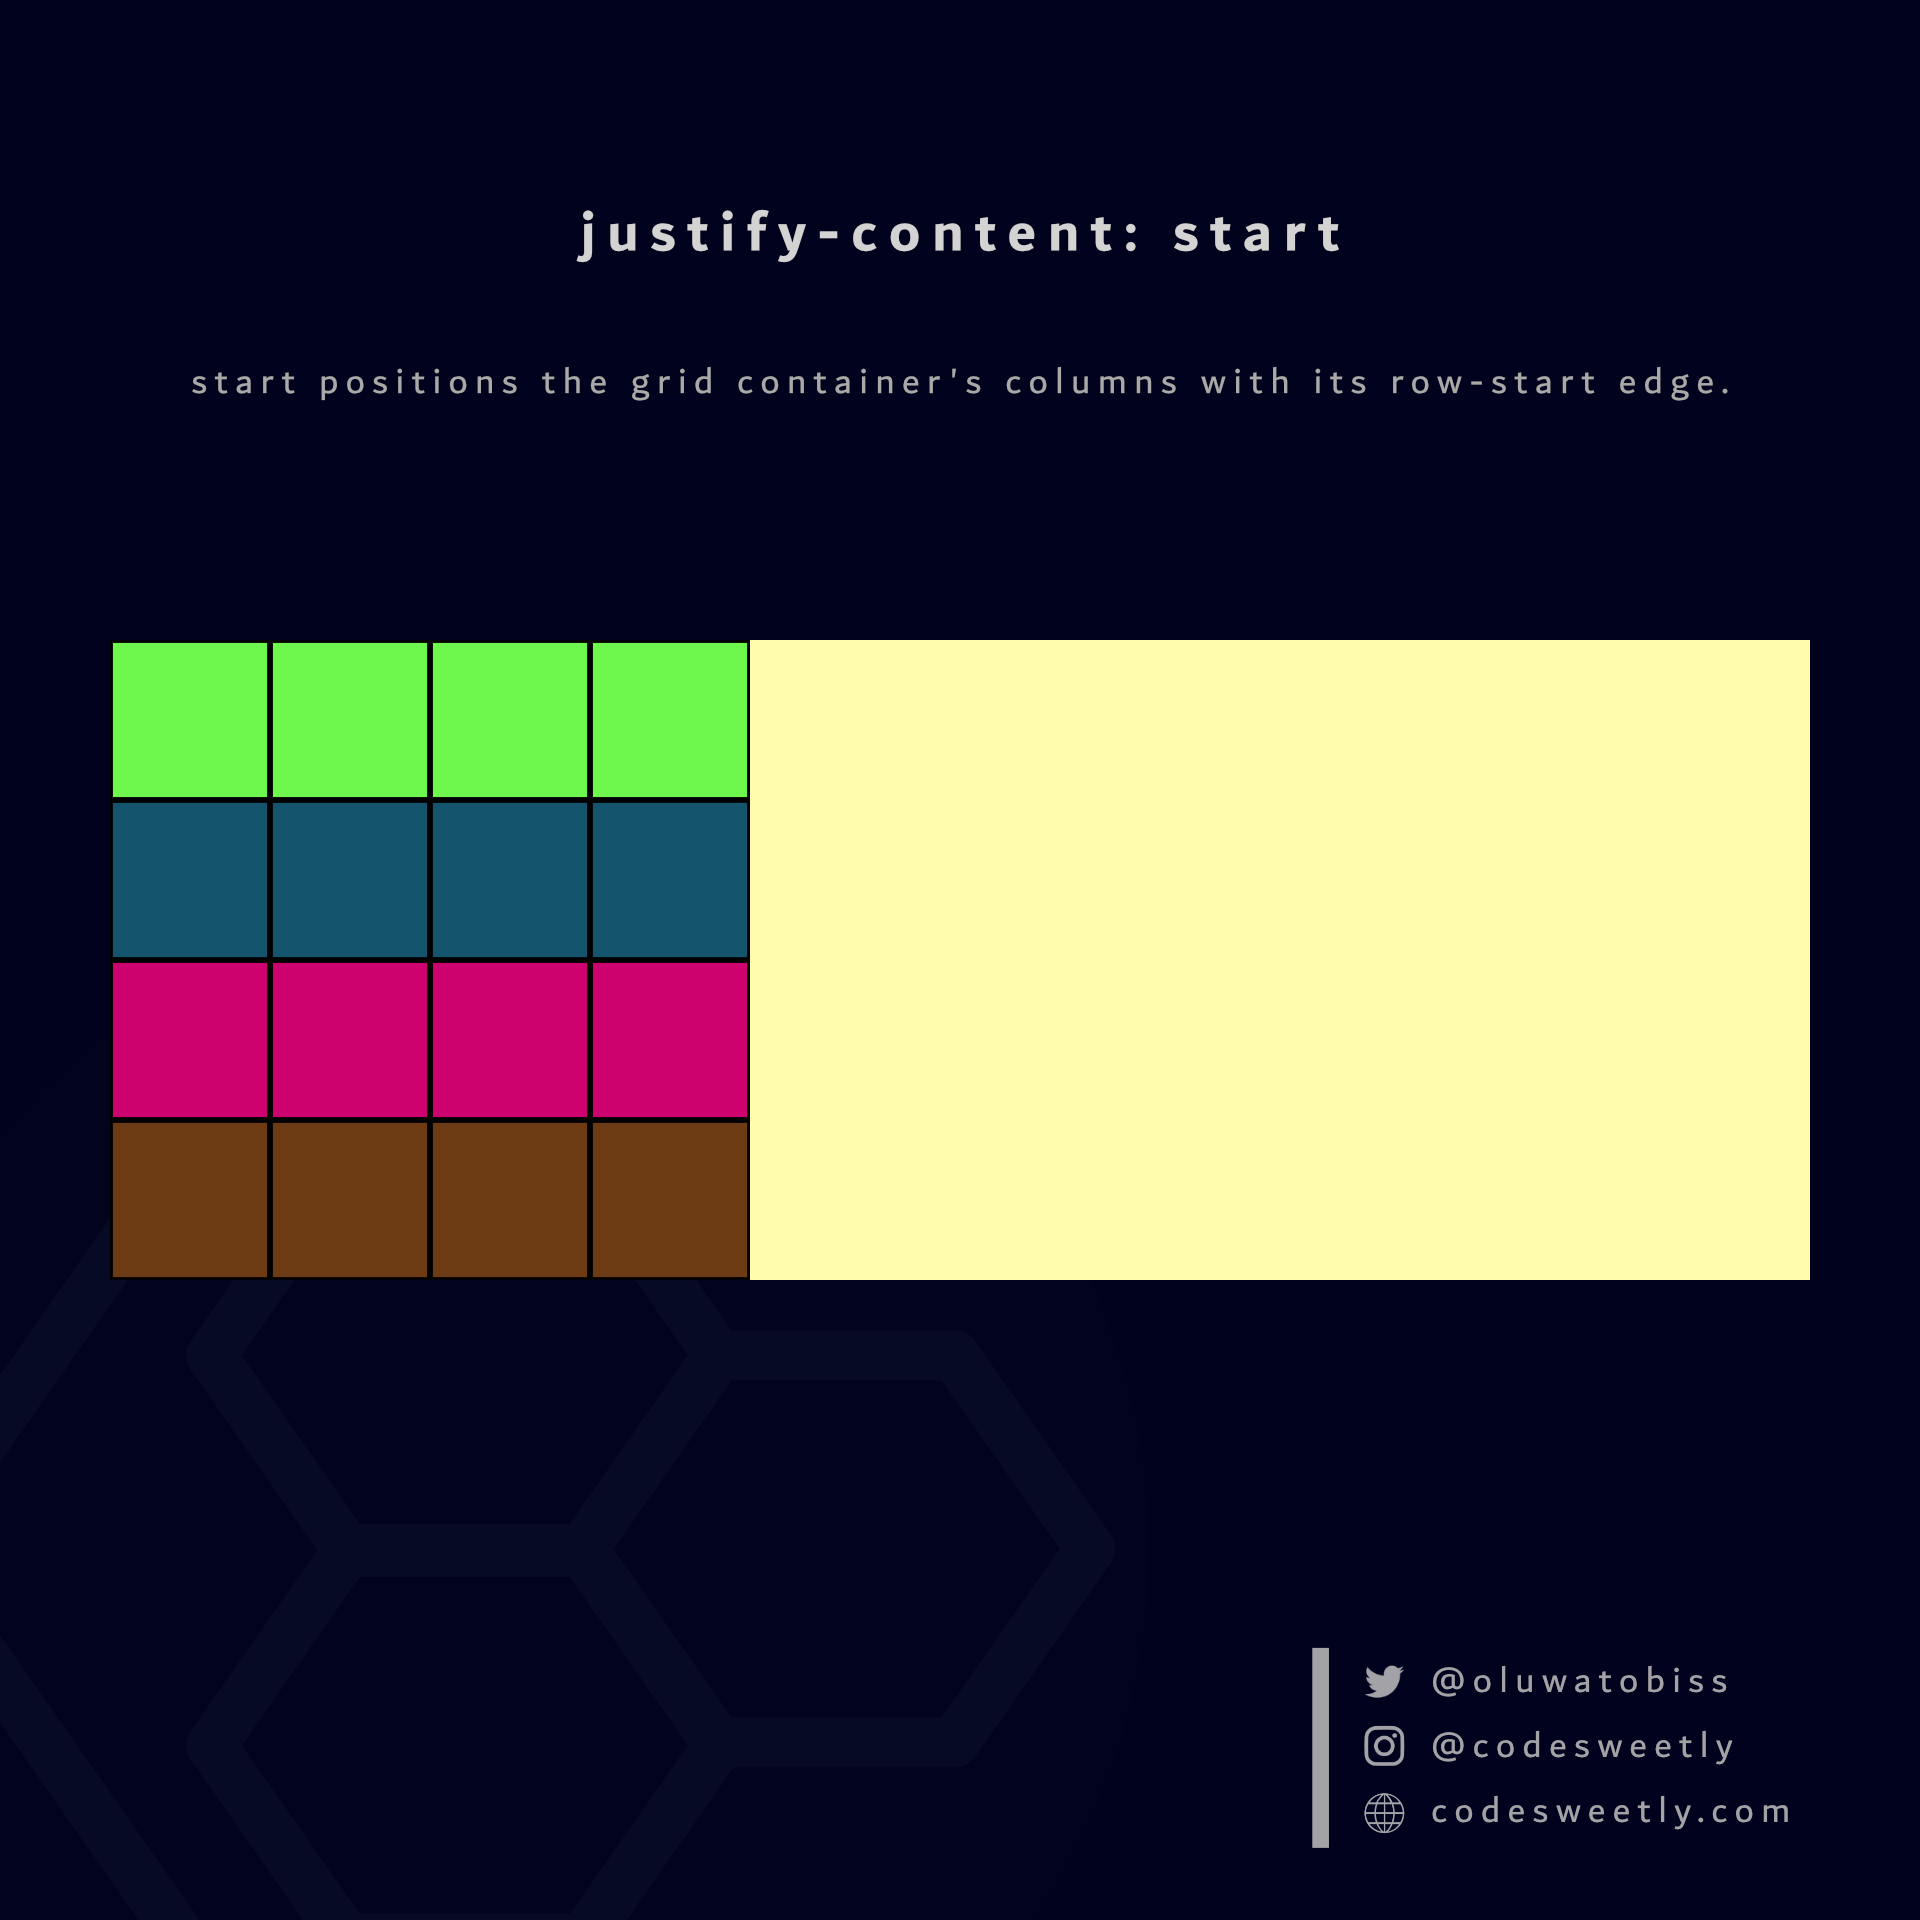 justify-content's start value positions columns to the grid container's row-start edge